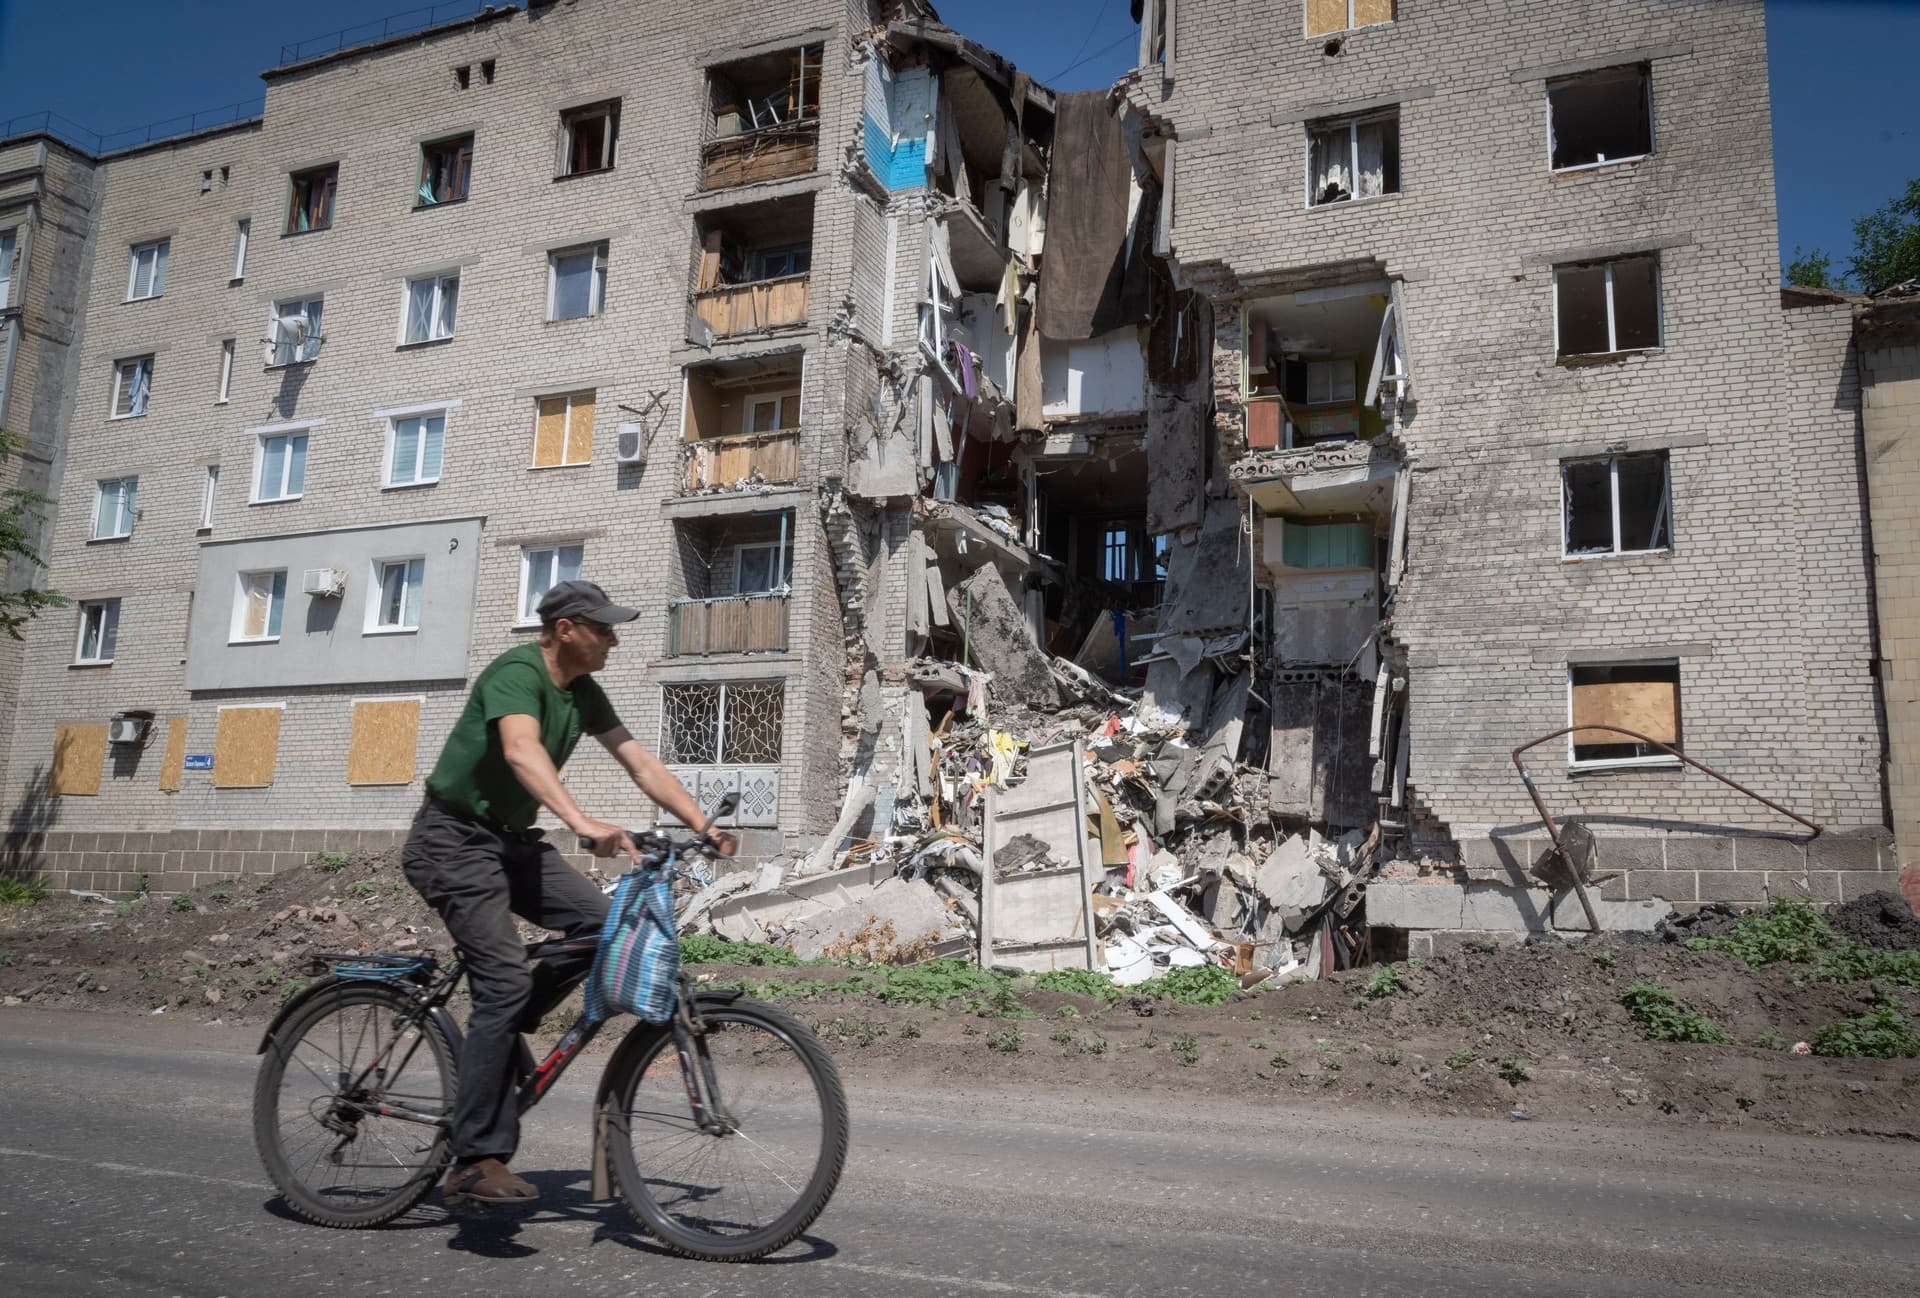 A man rides a bicycle past a building damaged in Russian shelling in Bakhmut